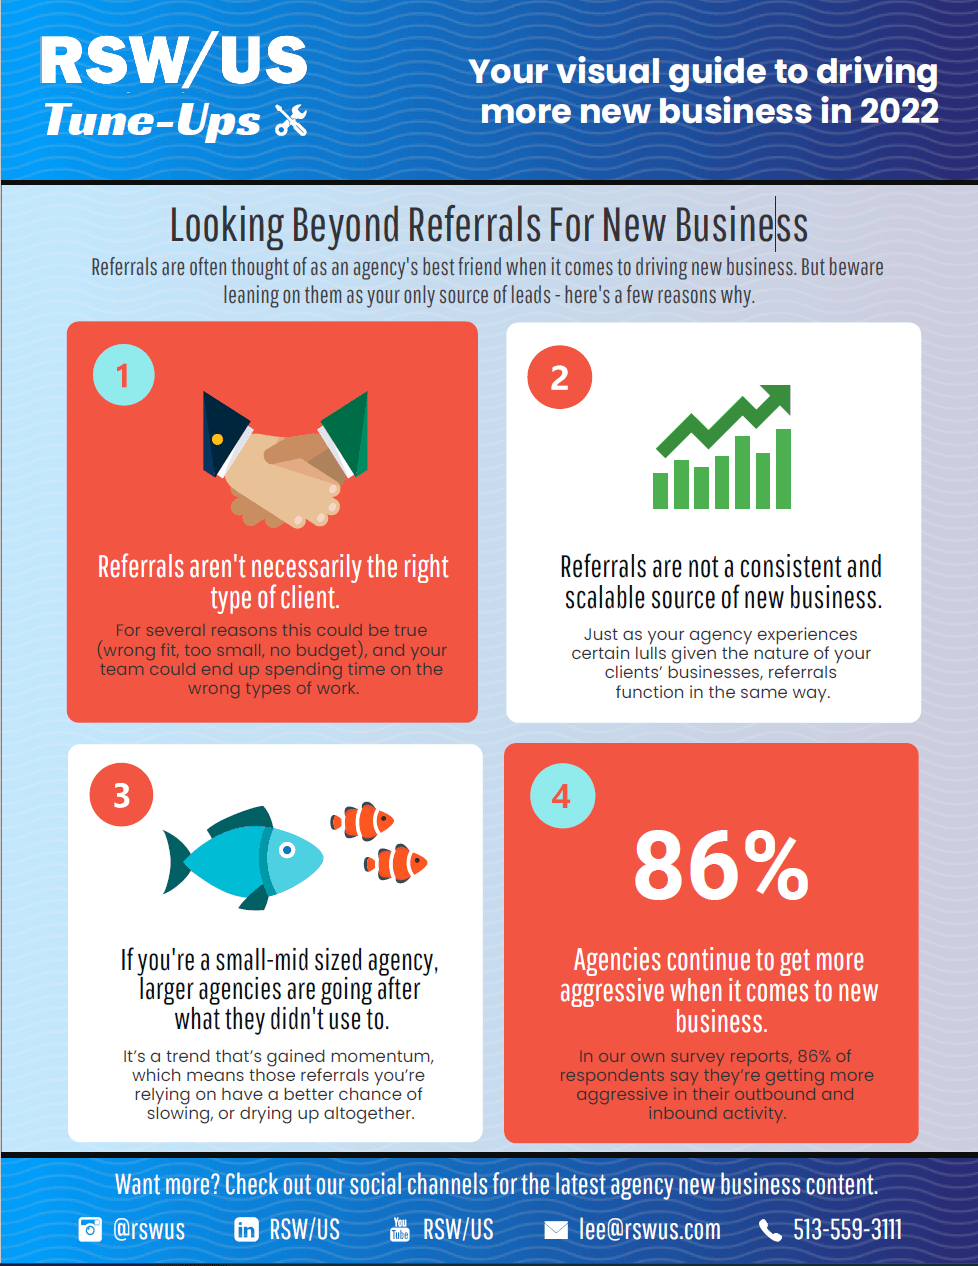 Looking Beyond Referrals For New Business